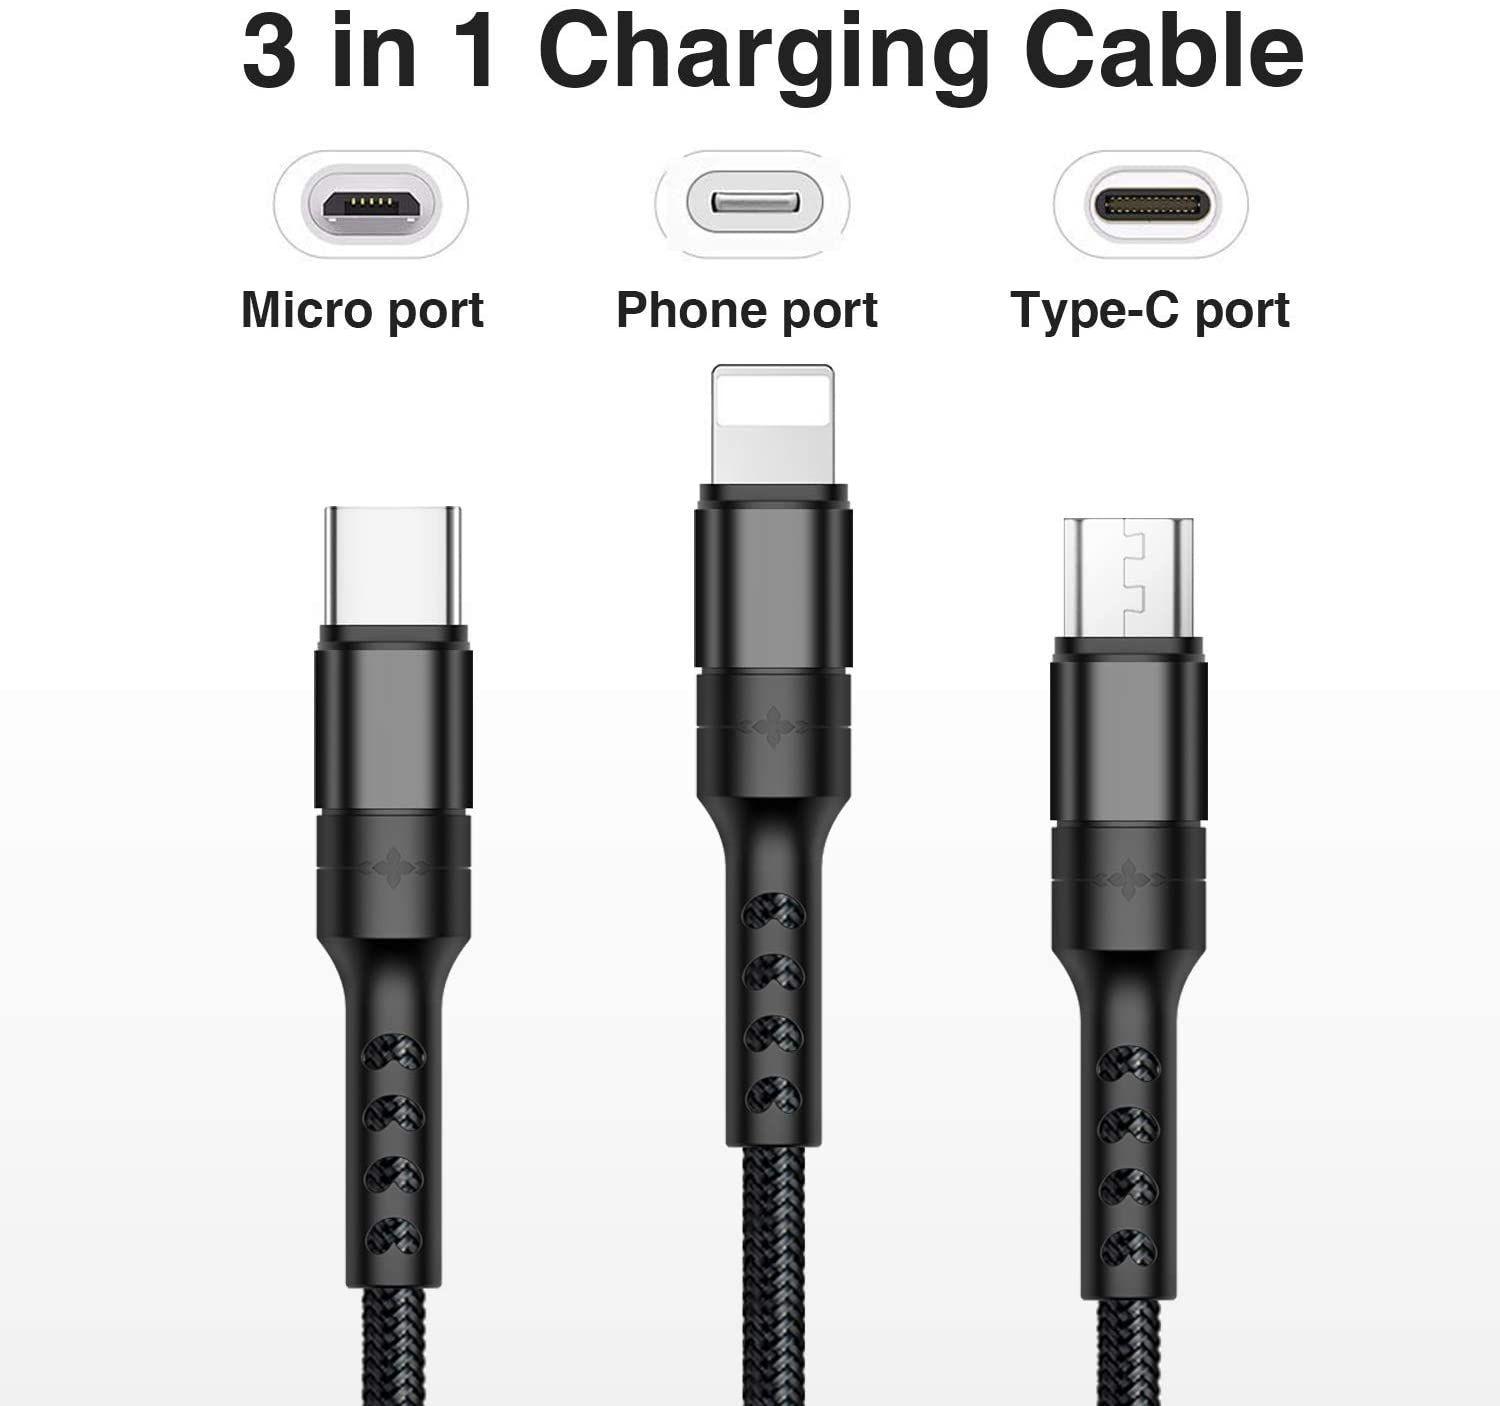 INECK® Câble Multi embout USB Chargeur USB Câble pour Samsung Galaxy  S10/S9/S8, Huawei p30/P20, Honor, Xiaomi, OnePlus, Wiko, Kindle 1.2M